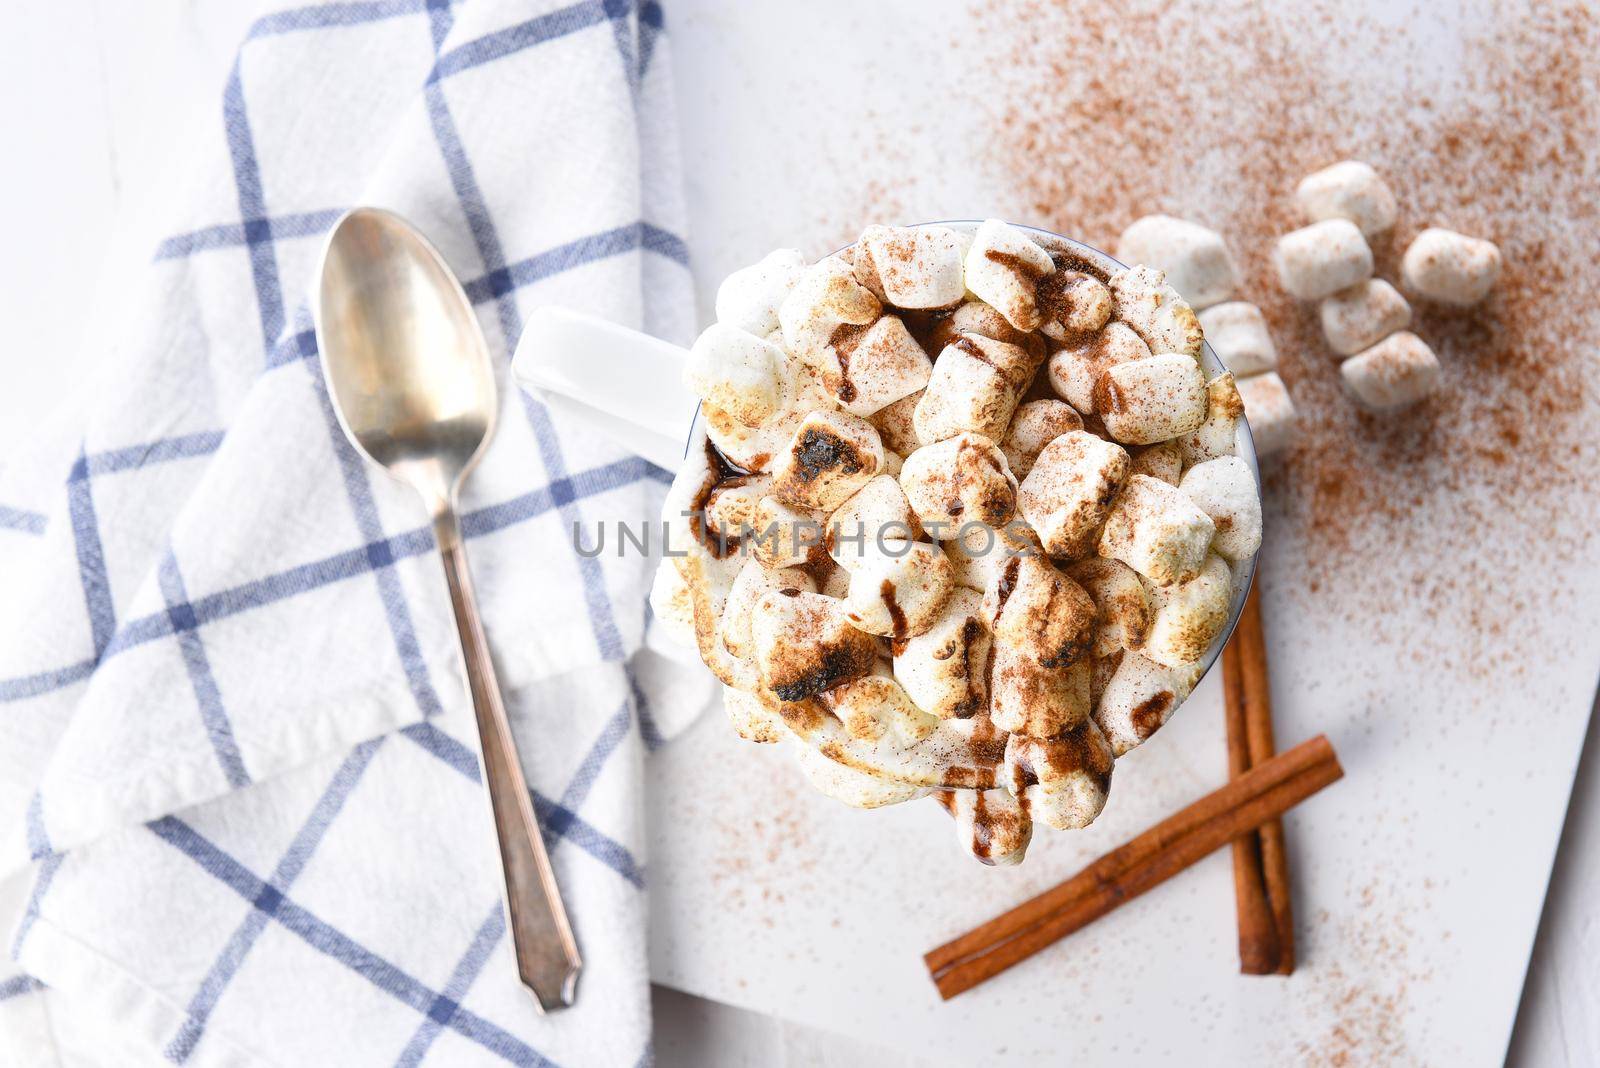 Overhead view of a mug of hot chocolate with toasted marshmallows sprinkled with cinnamon by sCukrov